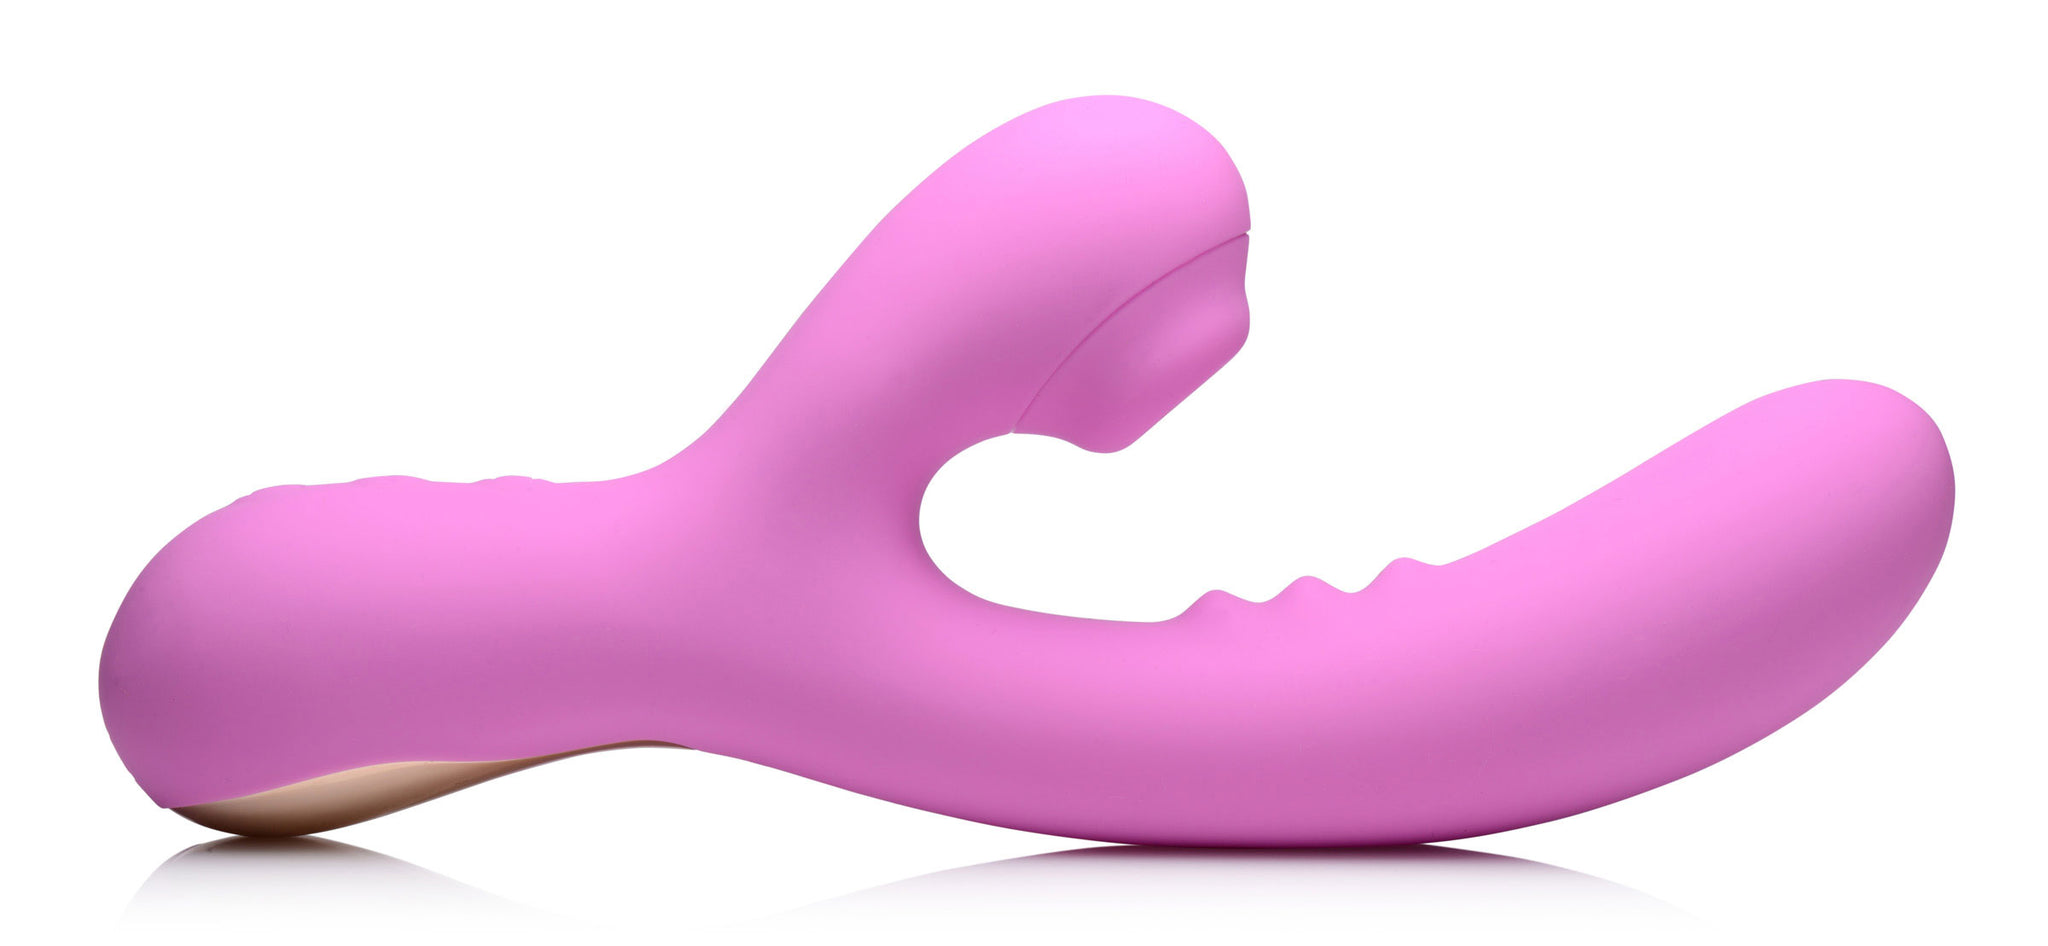 8x Silicone Suction Rabbit - Pink INM-AG575-PNK